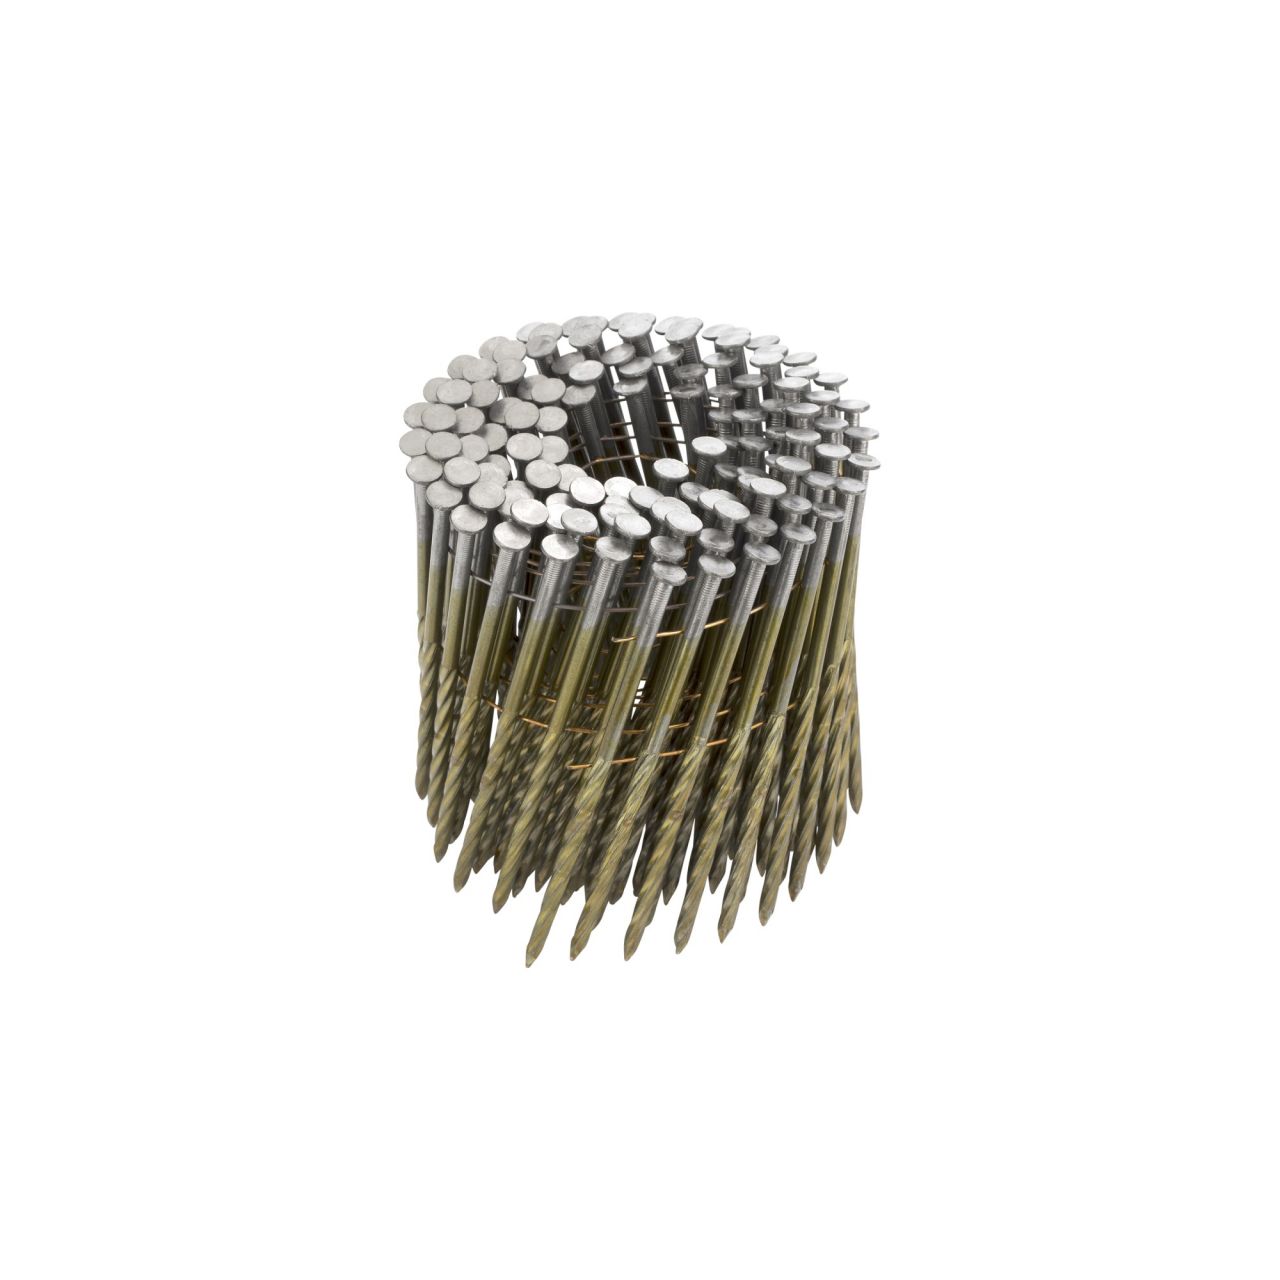 Clavo Coil 3,8 120 mm - Helicoidal